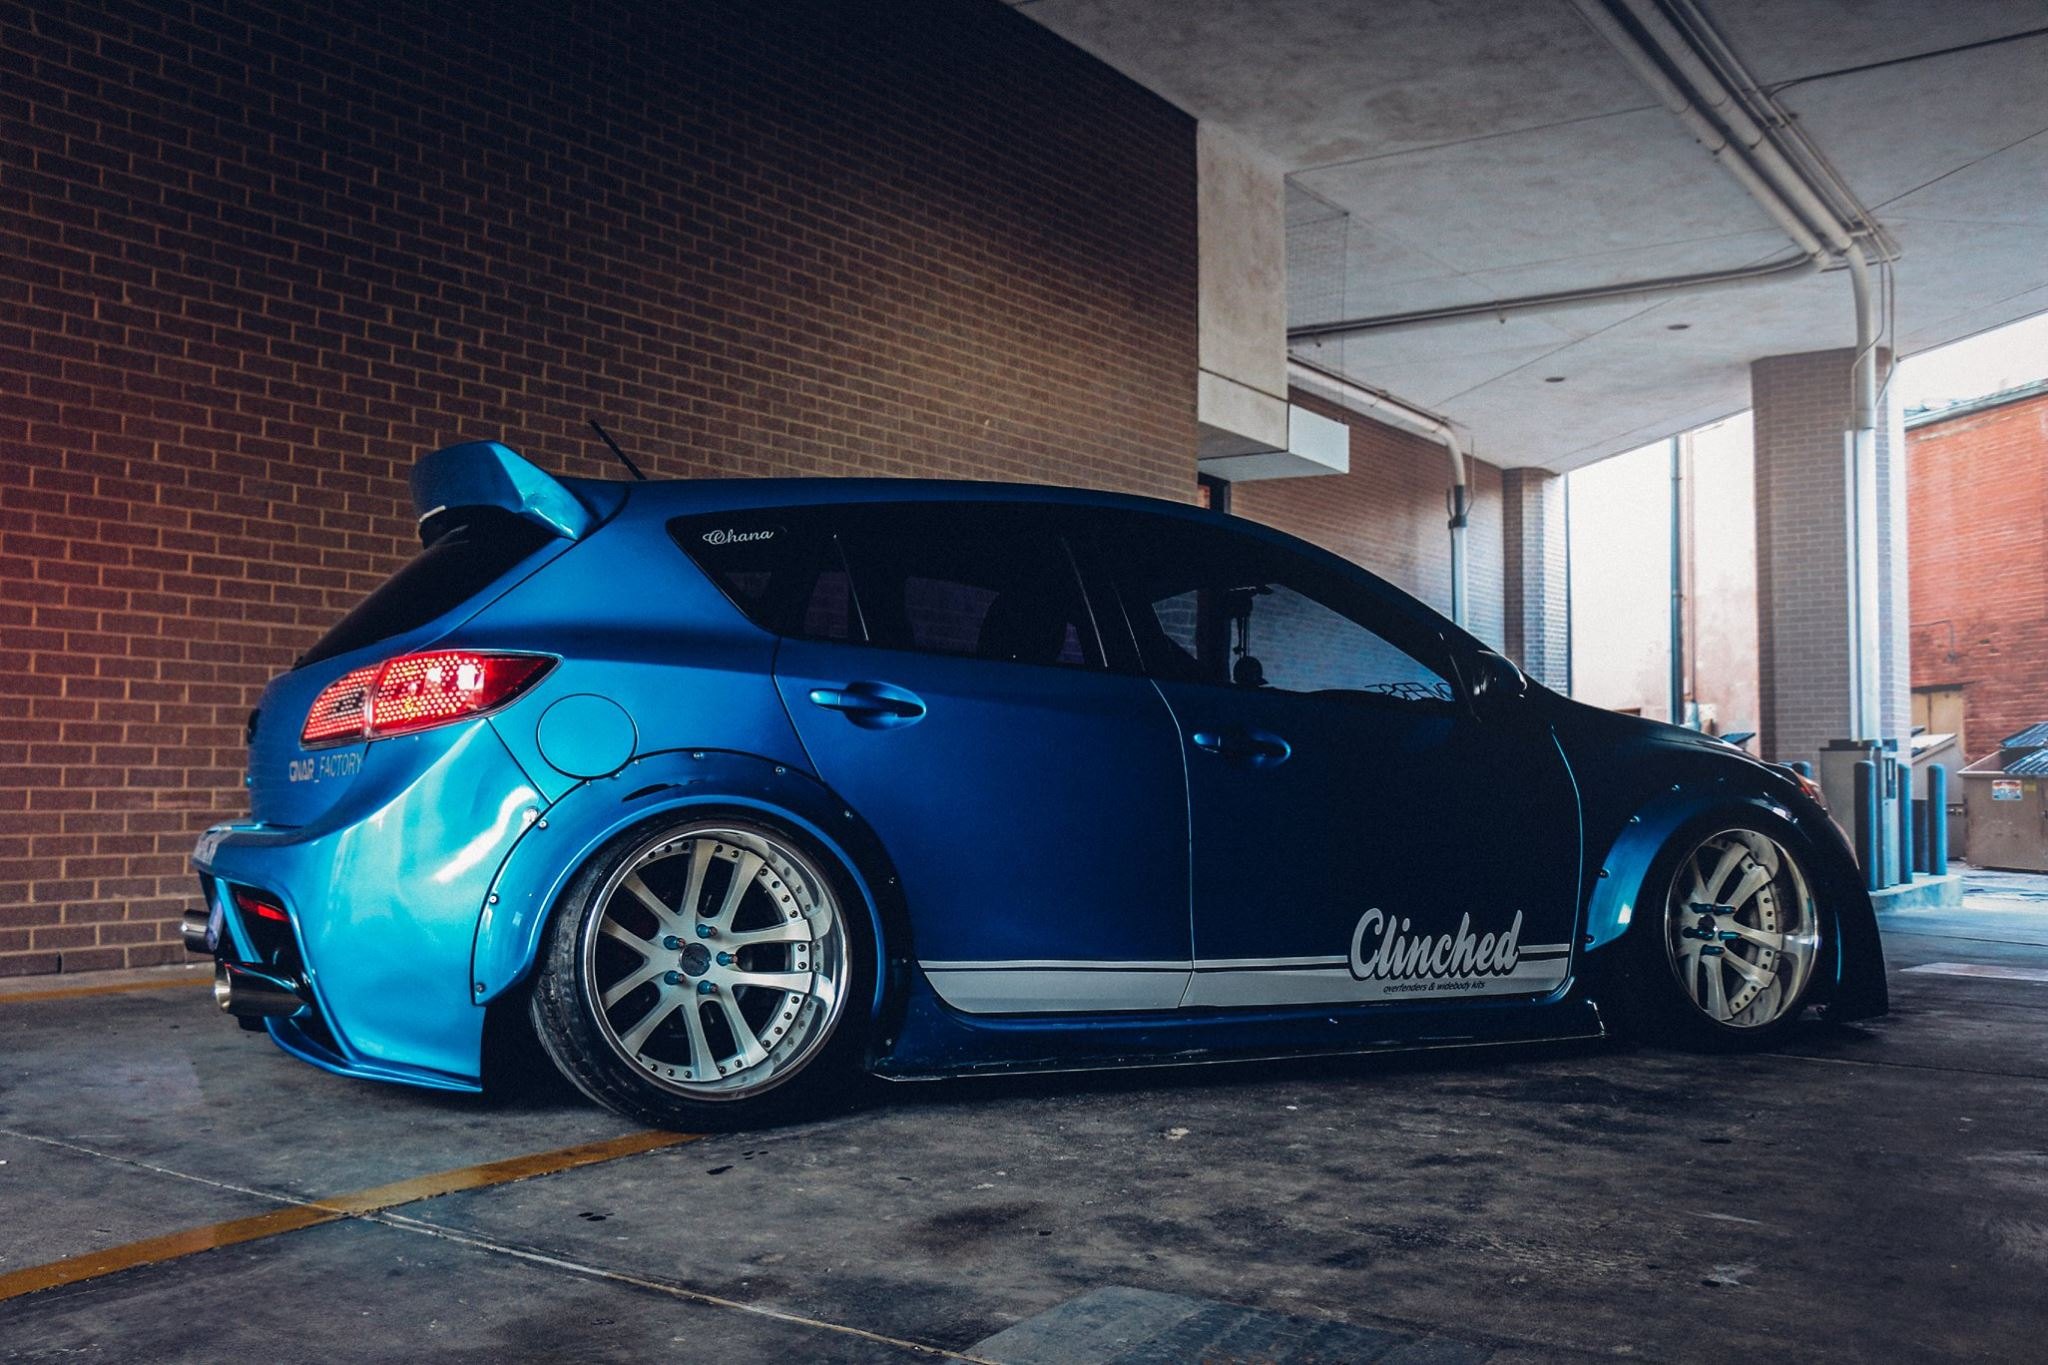 Aftermarket Fender Flares on Blue Mazda 3 - Photo by Clinched